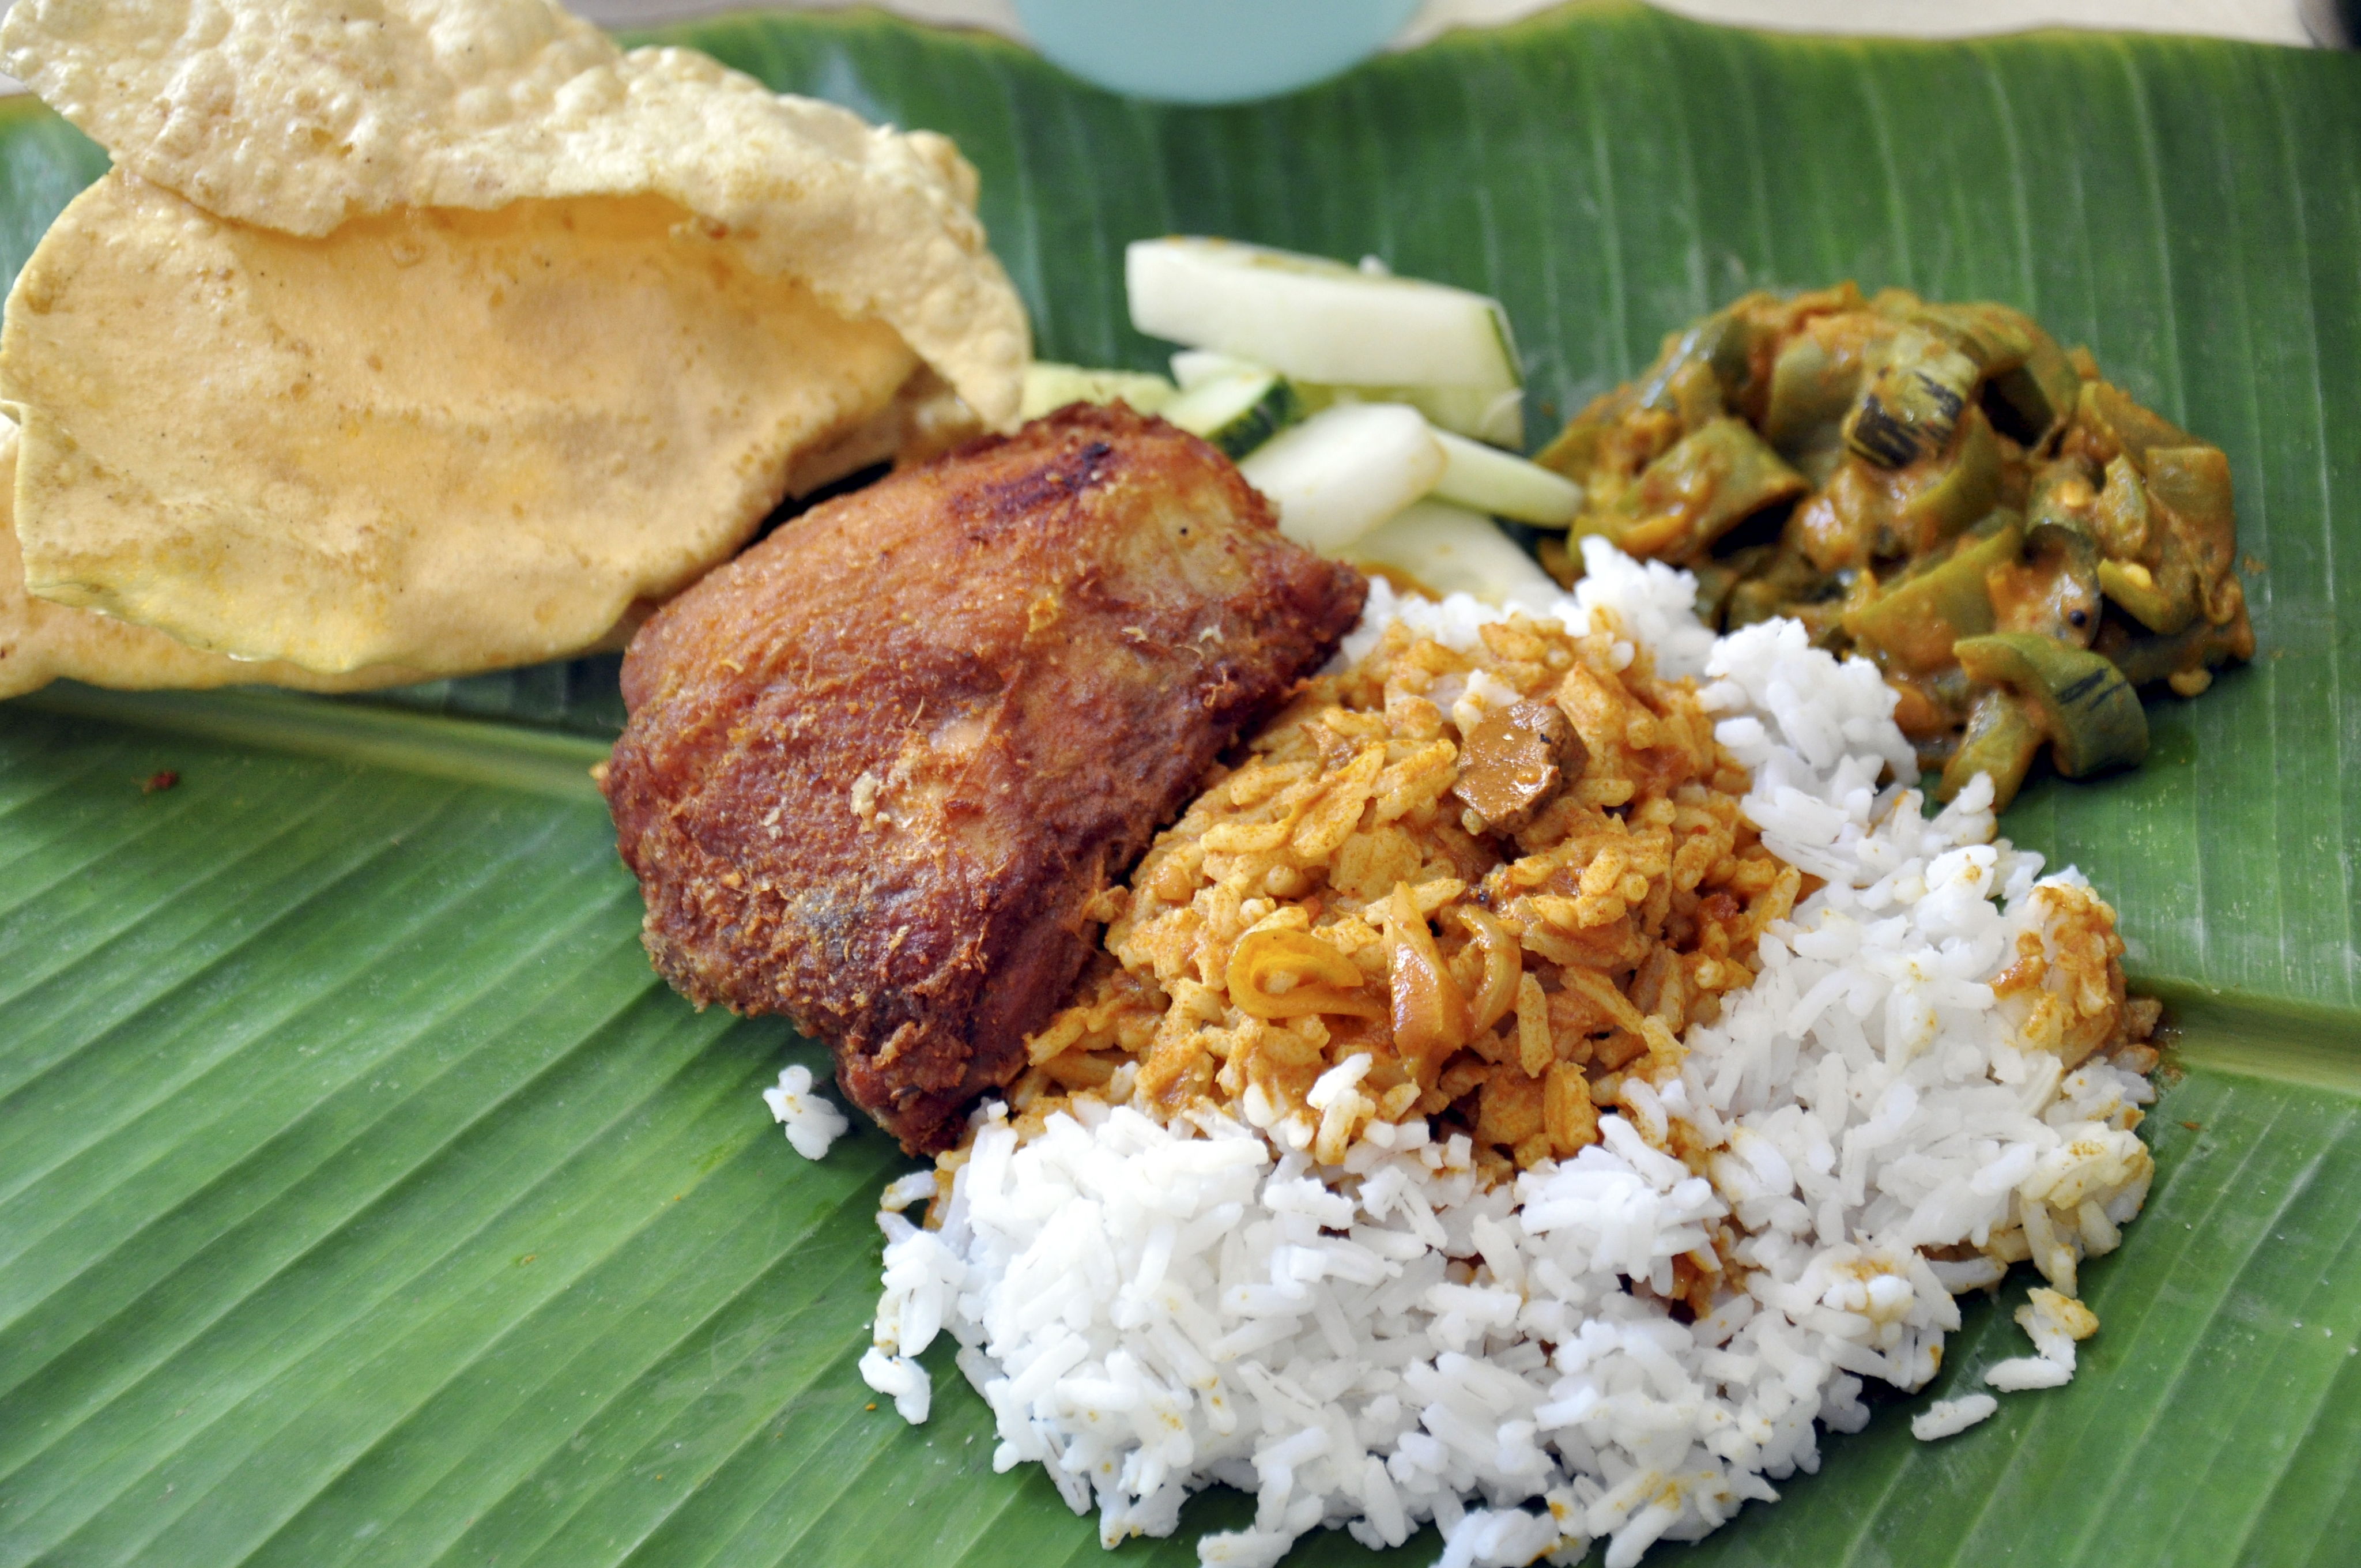 The banana leaf meal at Yap Kee Coffee Shop is served with vegetable of the day cucumber and papadam along with your choice of chicken fish or mutton.